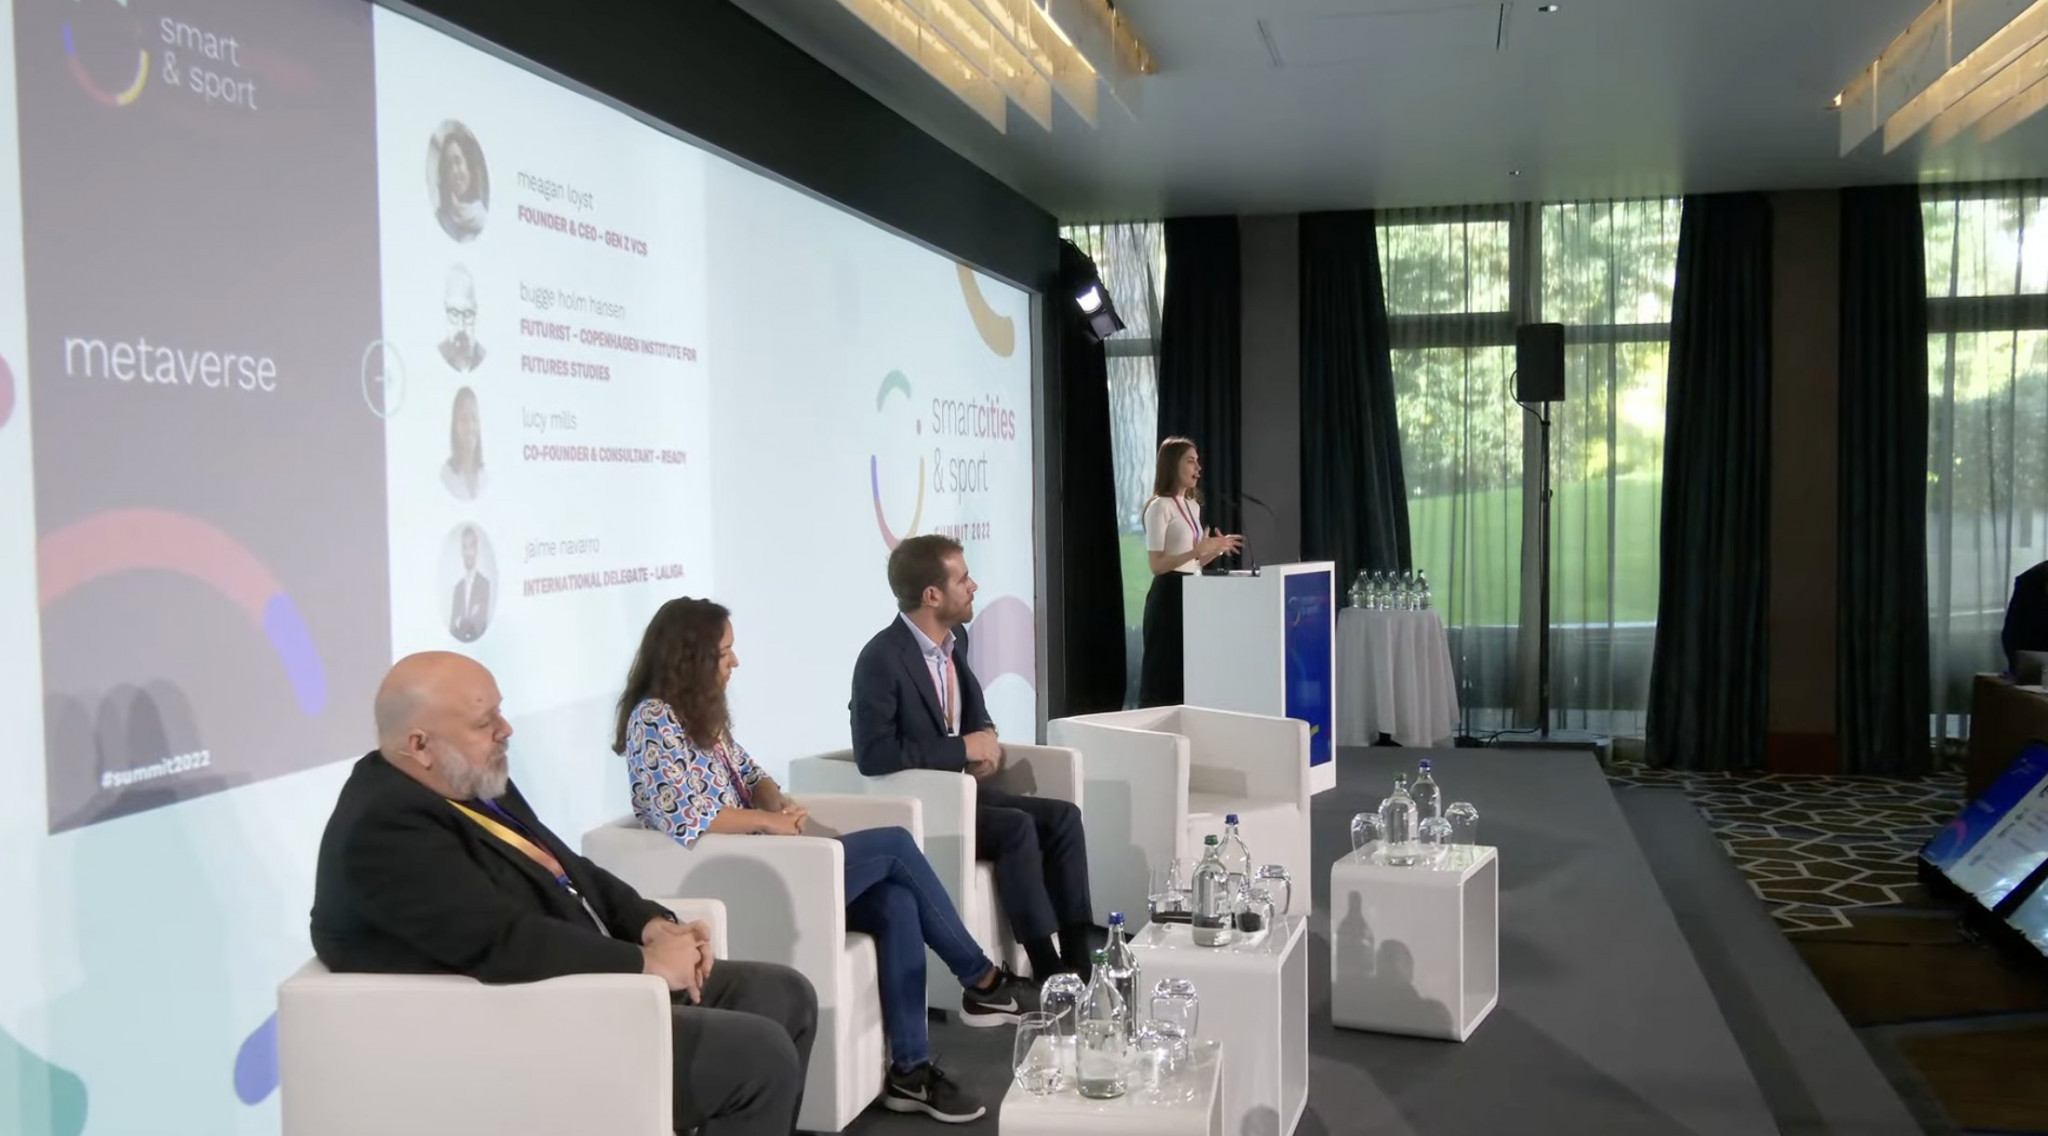 Metaverse was among the topics discussed in Lausanne ©smartcities